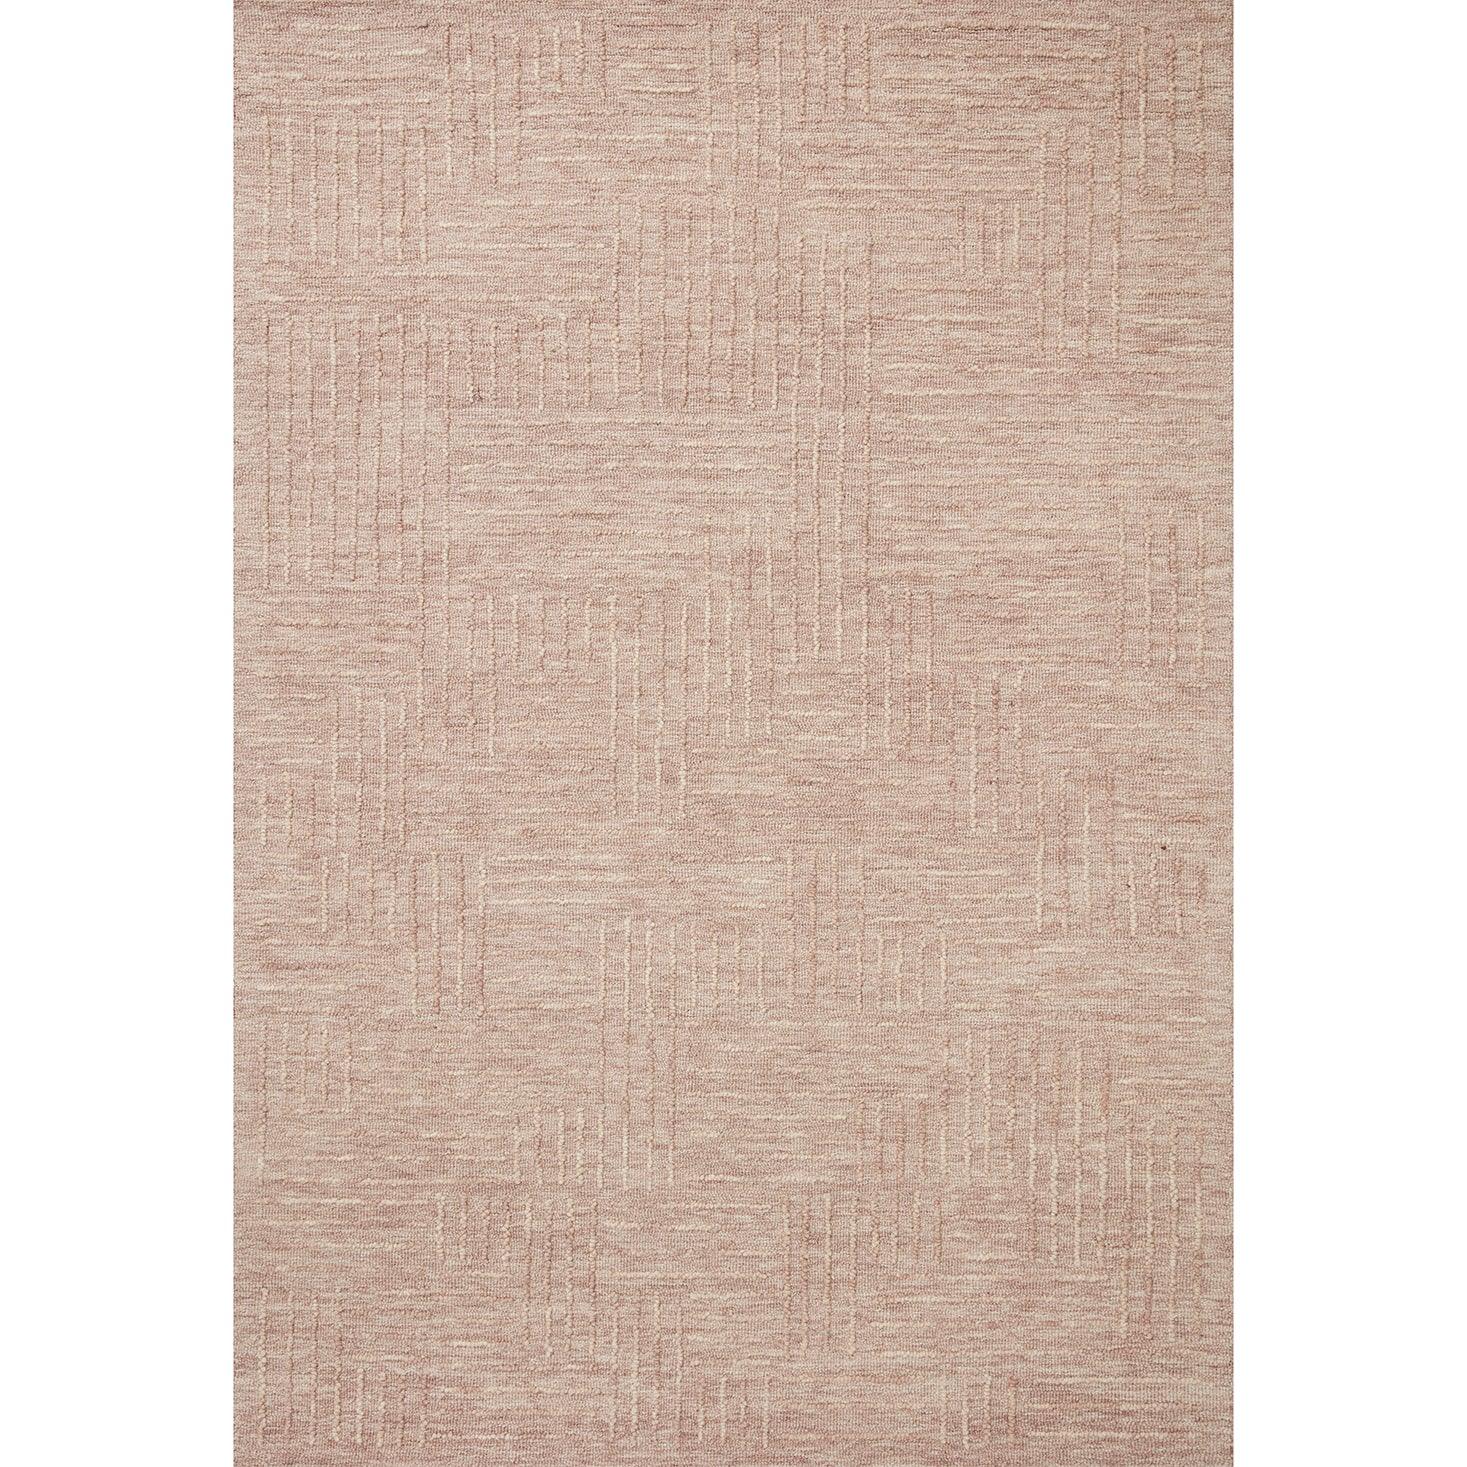 Magnolia Home Sarah Collection Blush - Reimagine Designs - new, Pattern, Rug, rugs, Solid